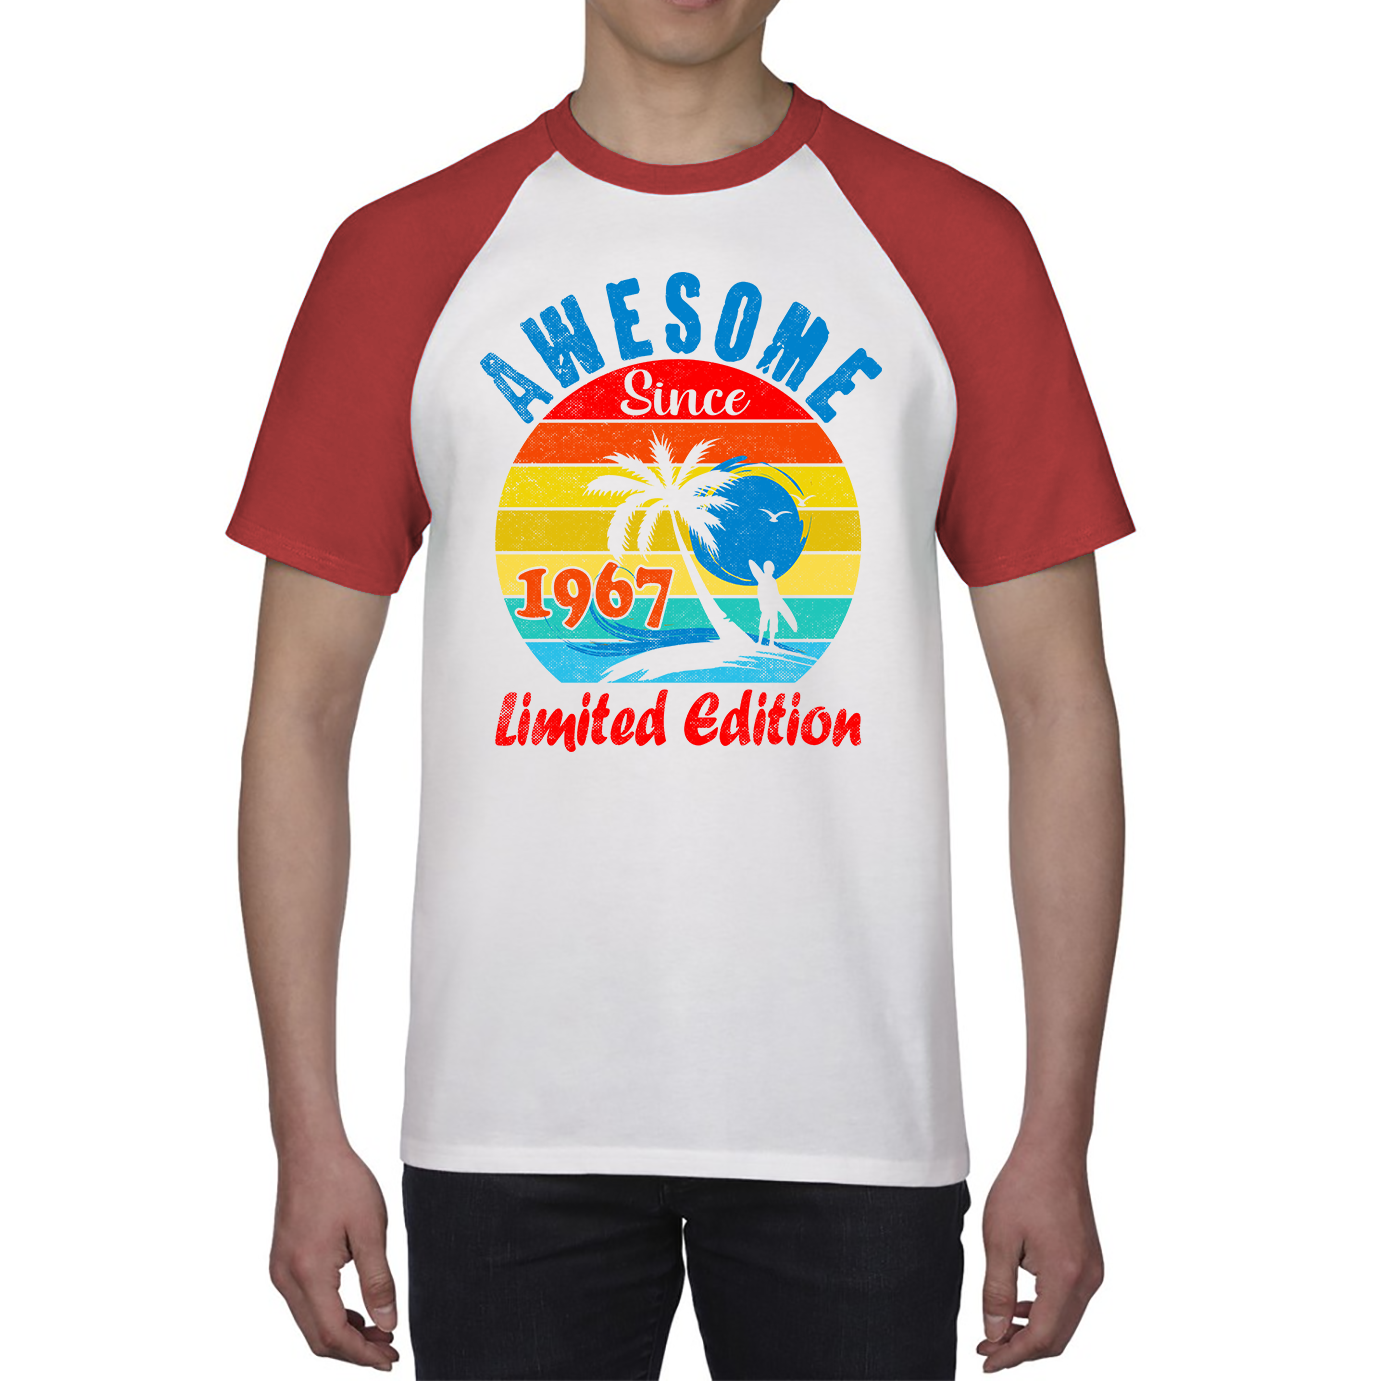 Awesome Since 1967 Limited Edition Shirt Vintage A Cool Palm Tree Beach Sunset Baseball T Shirt